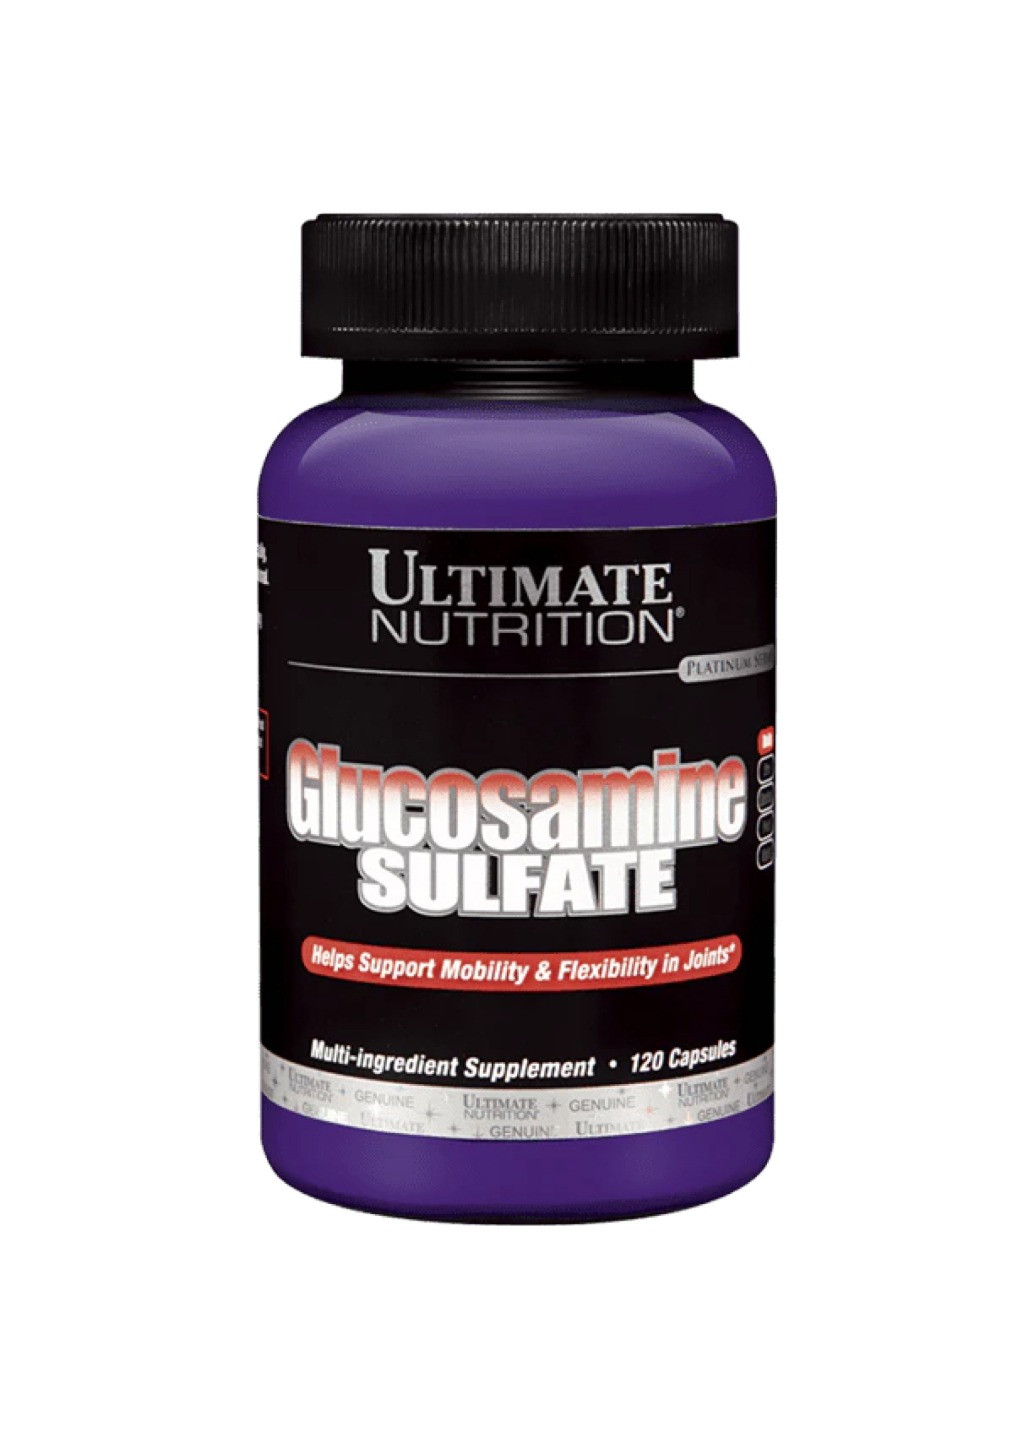 Глюкозамін сульфат Glucosamine Sulfate - 120 caps Ultimate Nutrition (273183002)